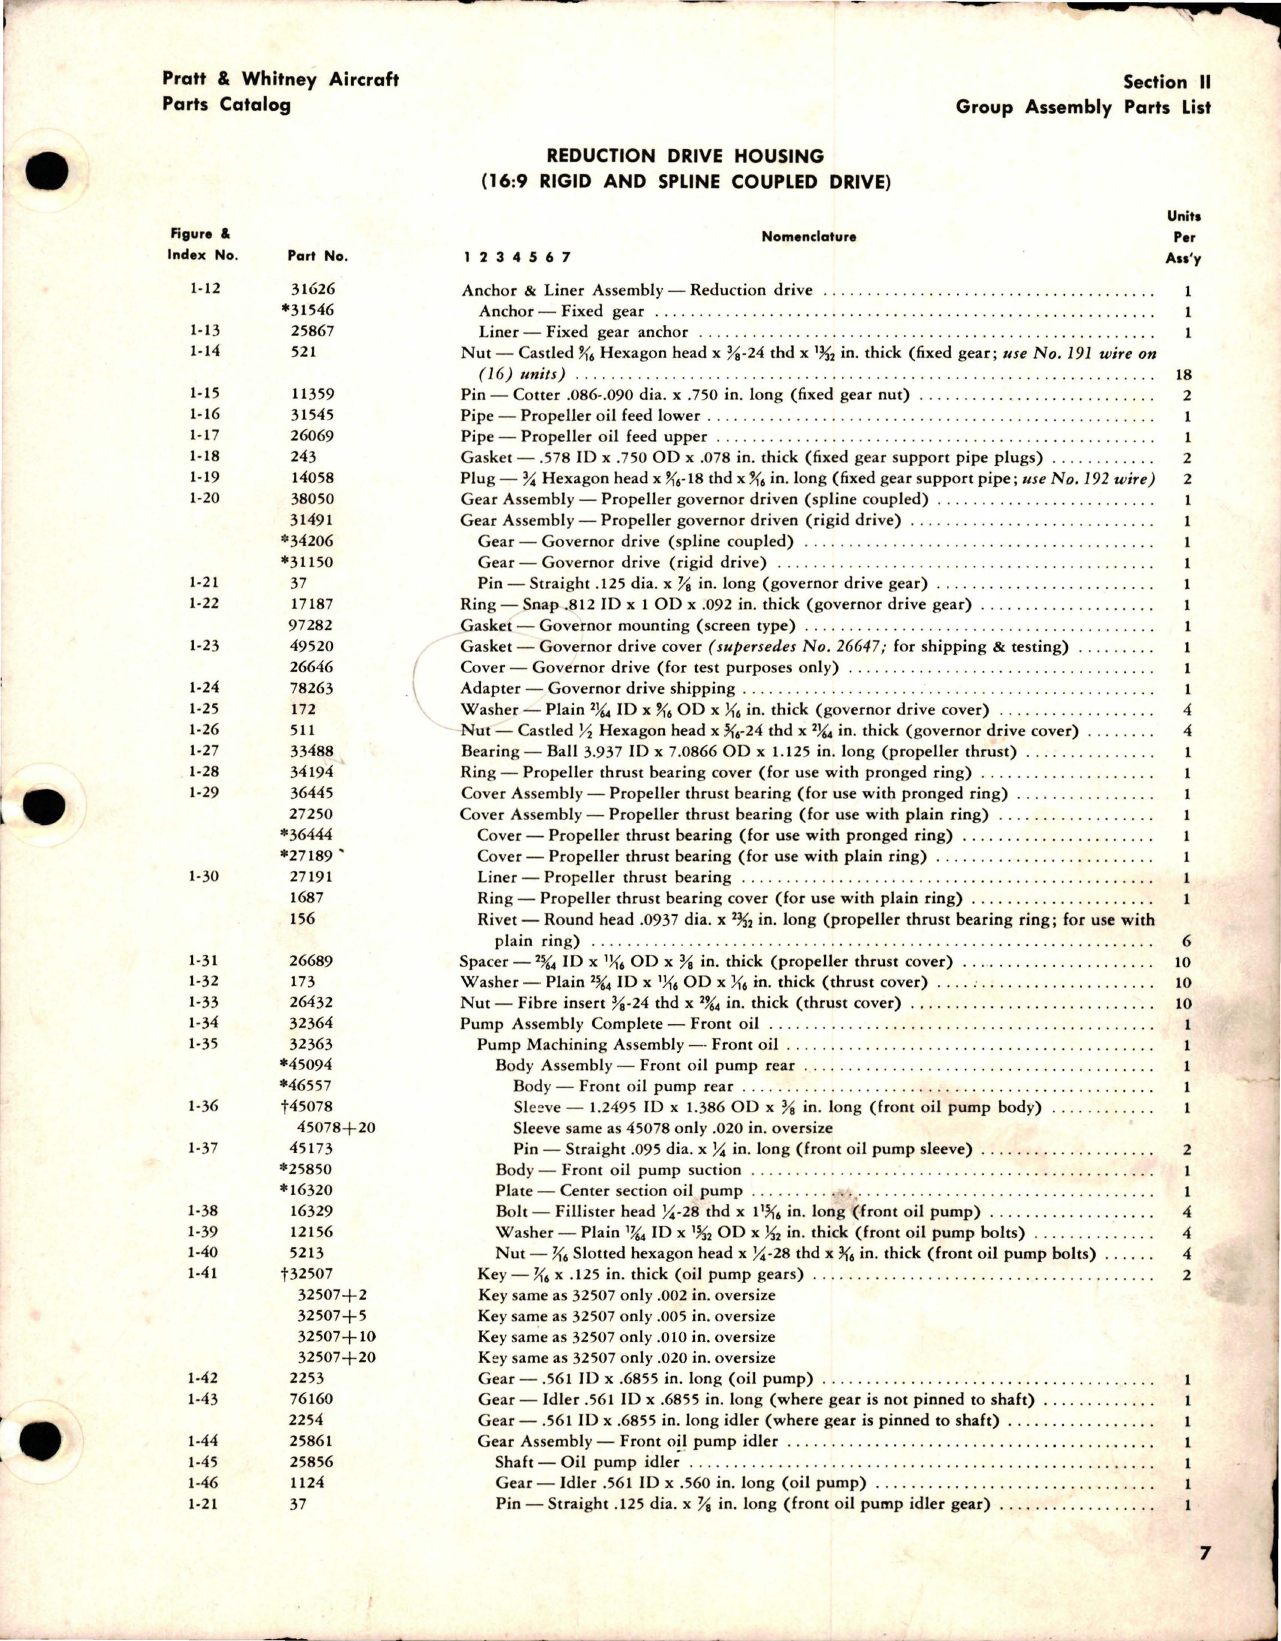 Sample page 8 from AirCorps Library document: Parts Catalog for Twin Wasp Model R-1830-C3G & -92 Pratt & Whitney Engines